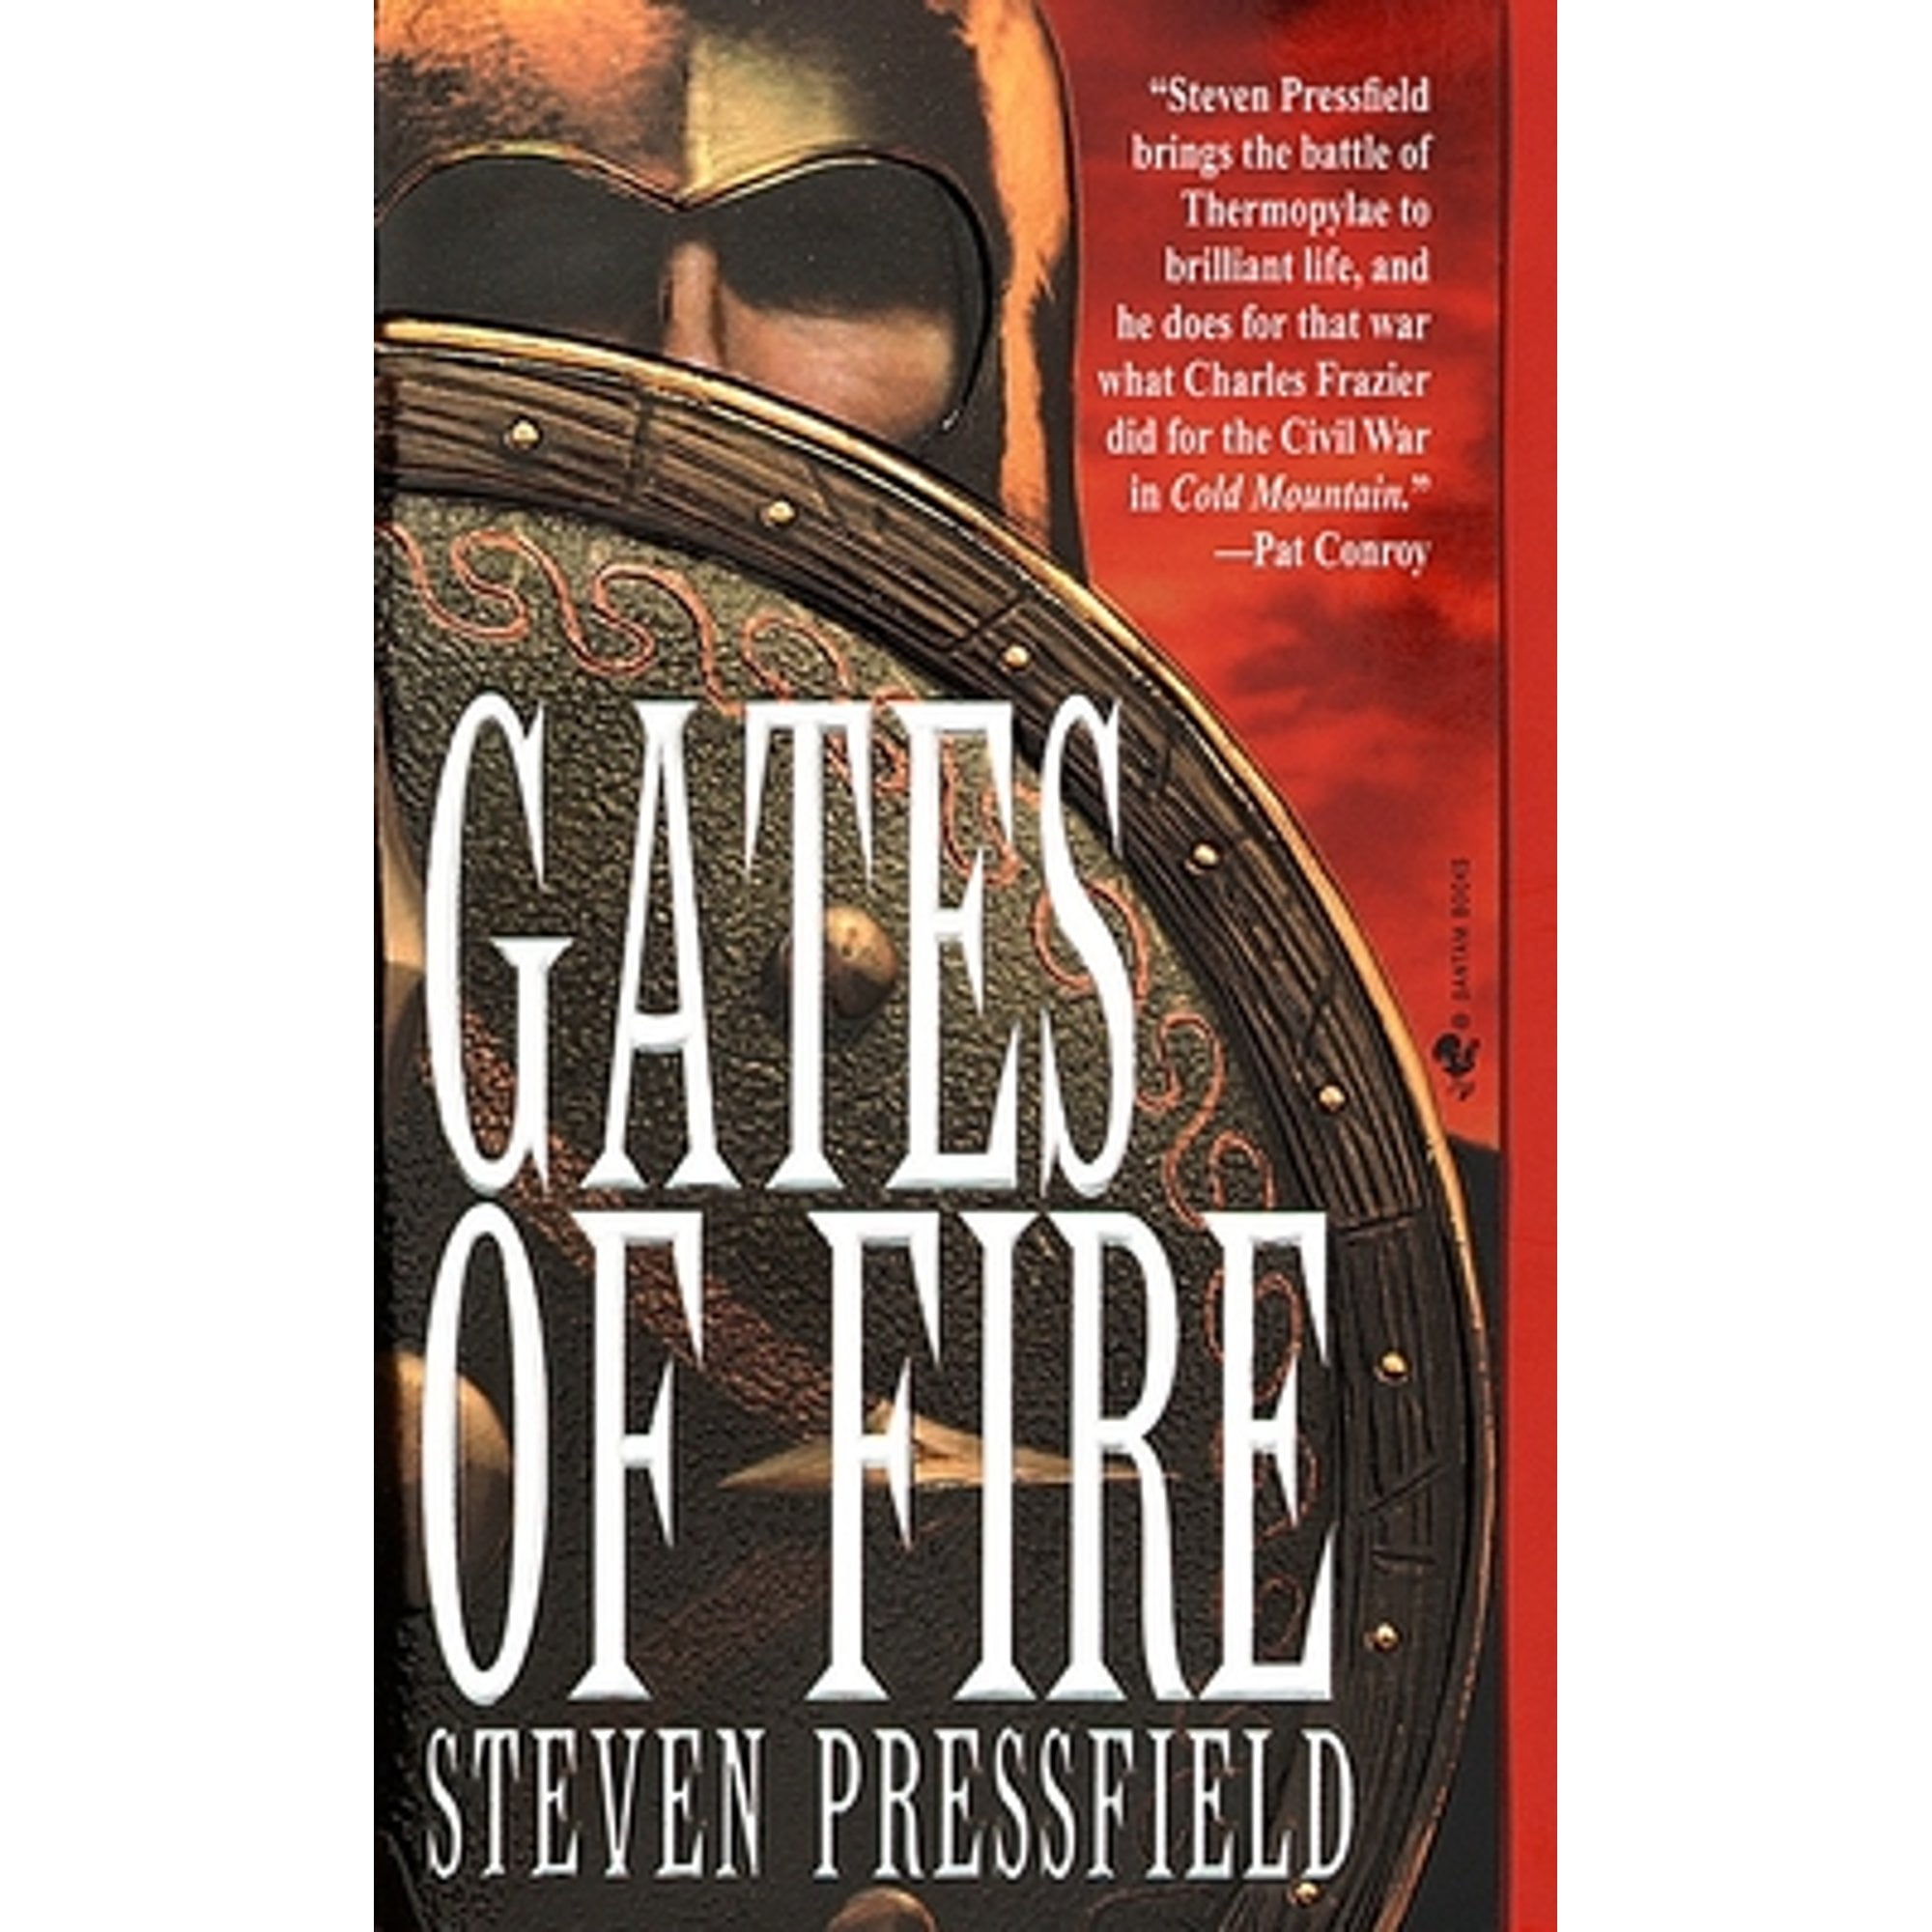 Books by Steven Pressfield and Complete Book Reviews